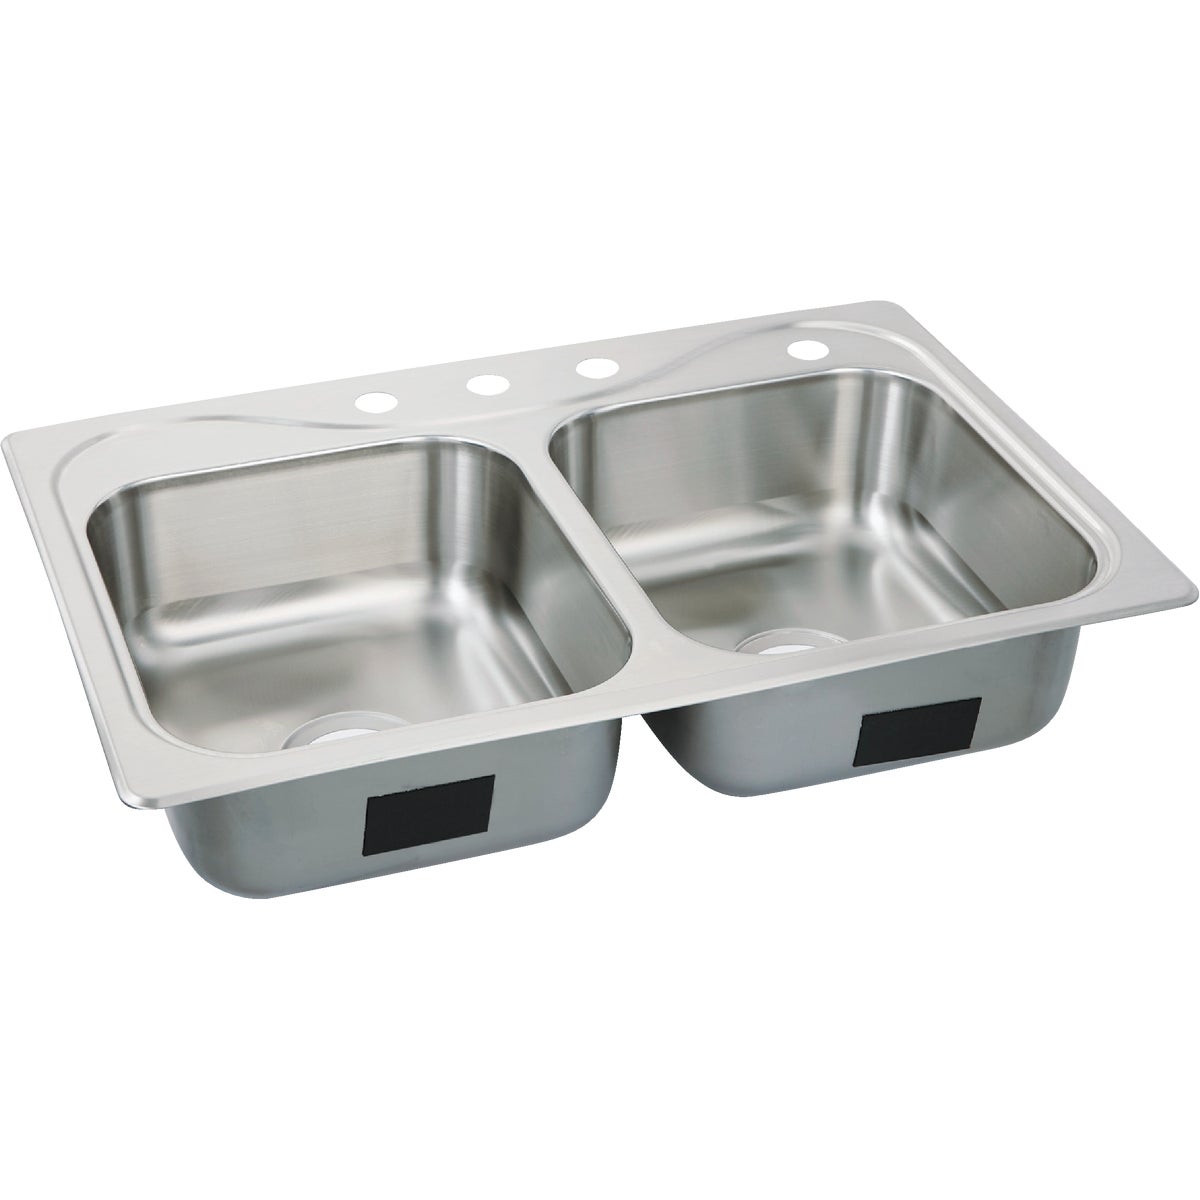 Sterling Southhaven Double Bowl 33 In. x 22 In. x 7 In. Deep Stainless Steel Kitchen Sink